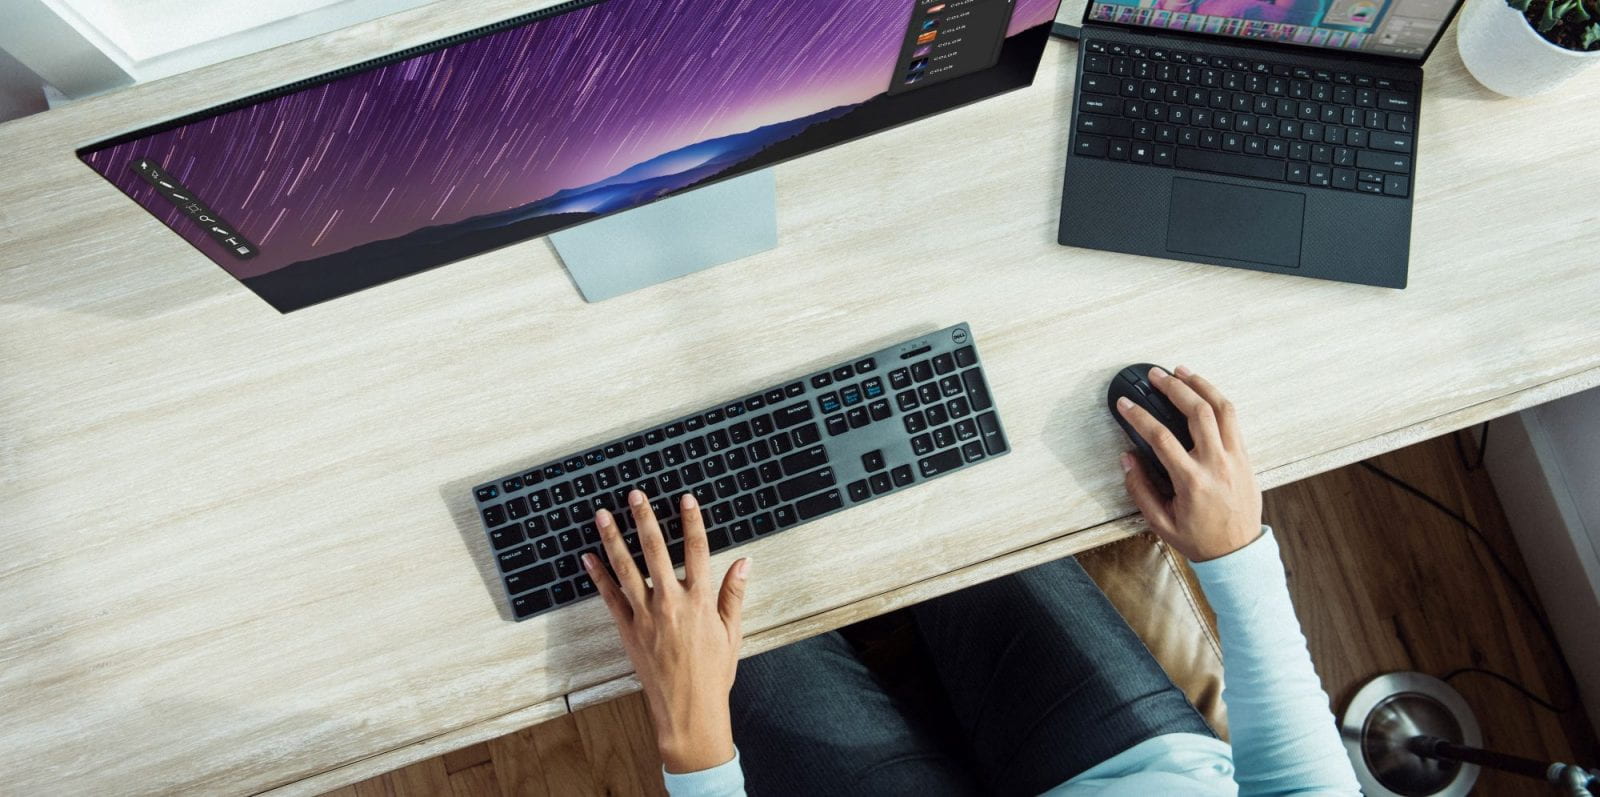 hands on keyboard and mouse in front of computer